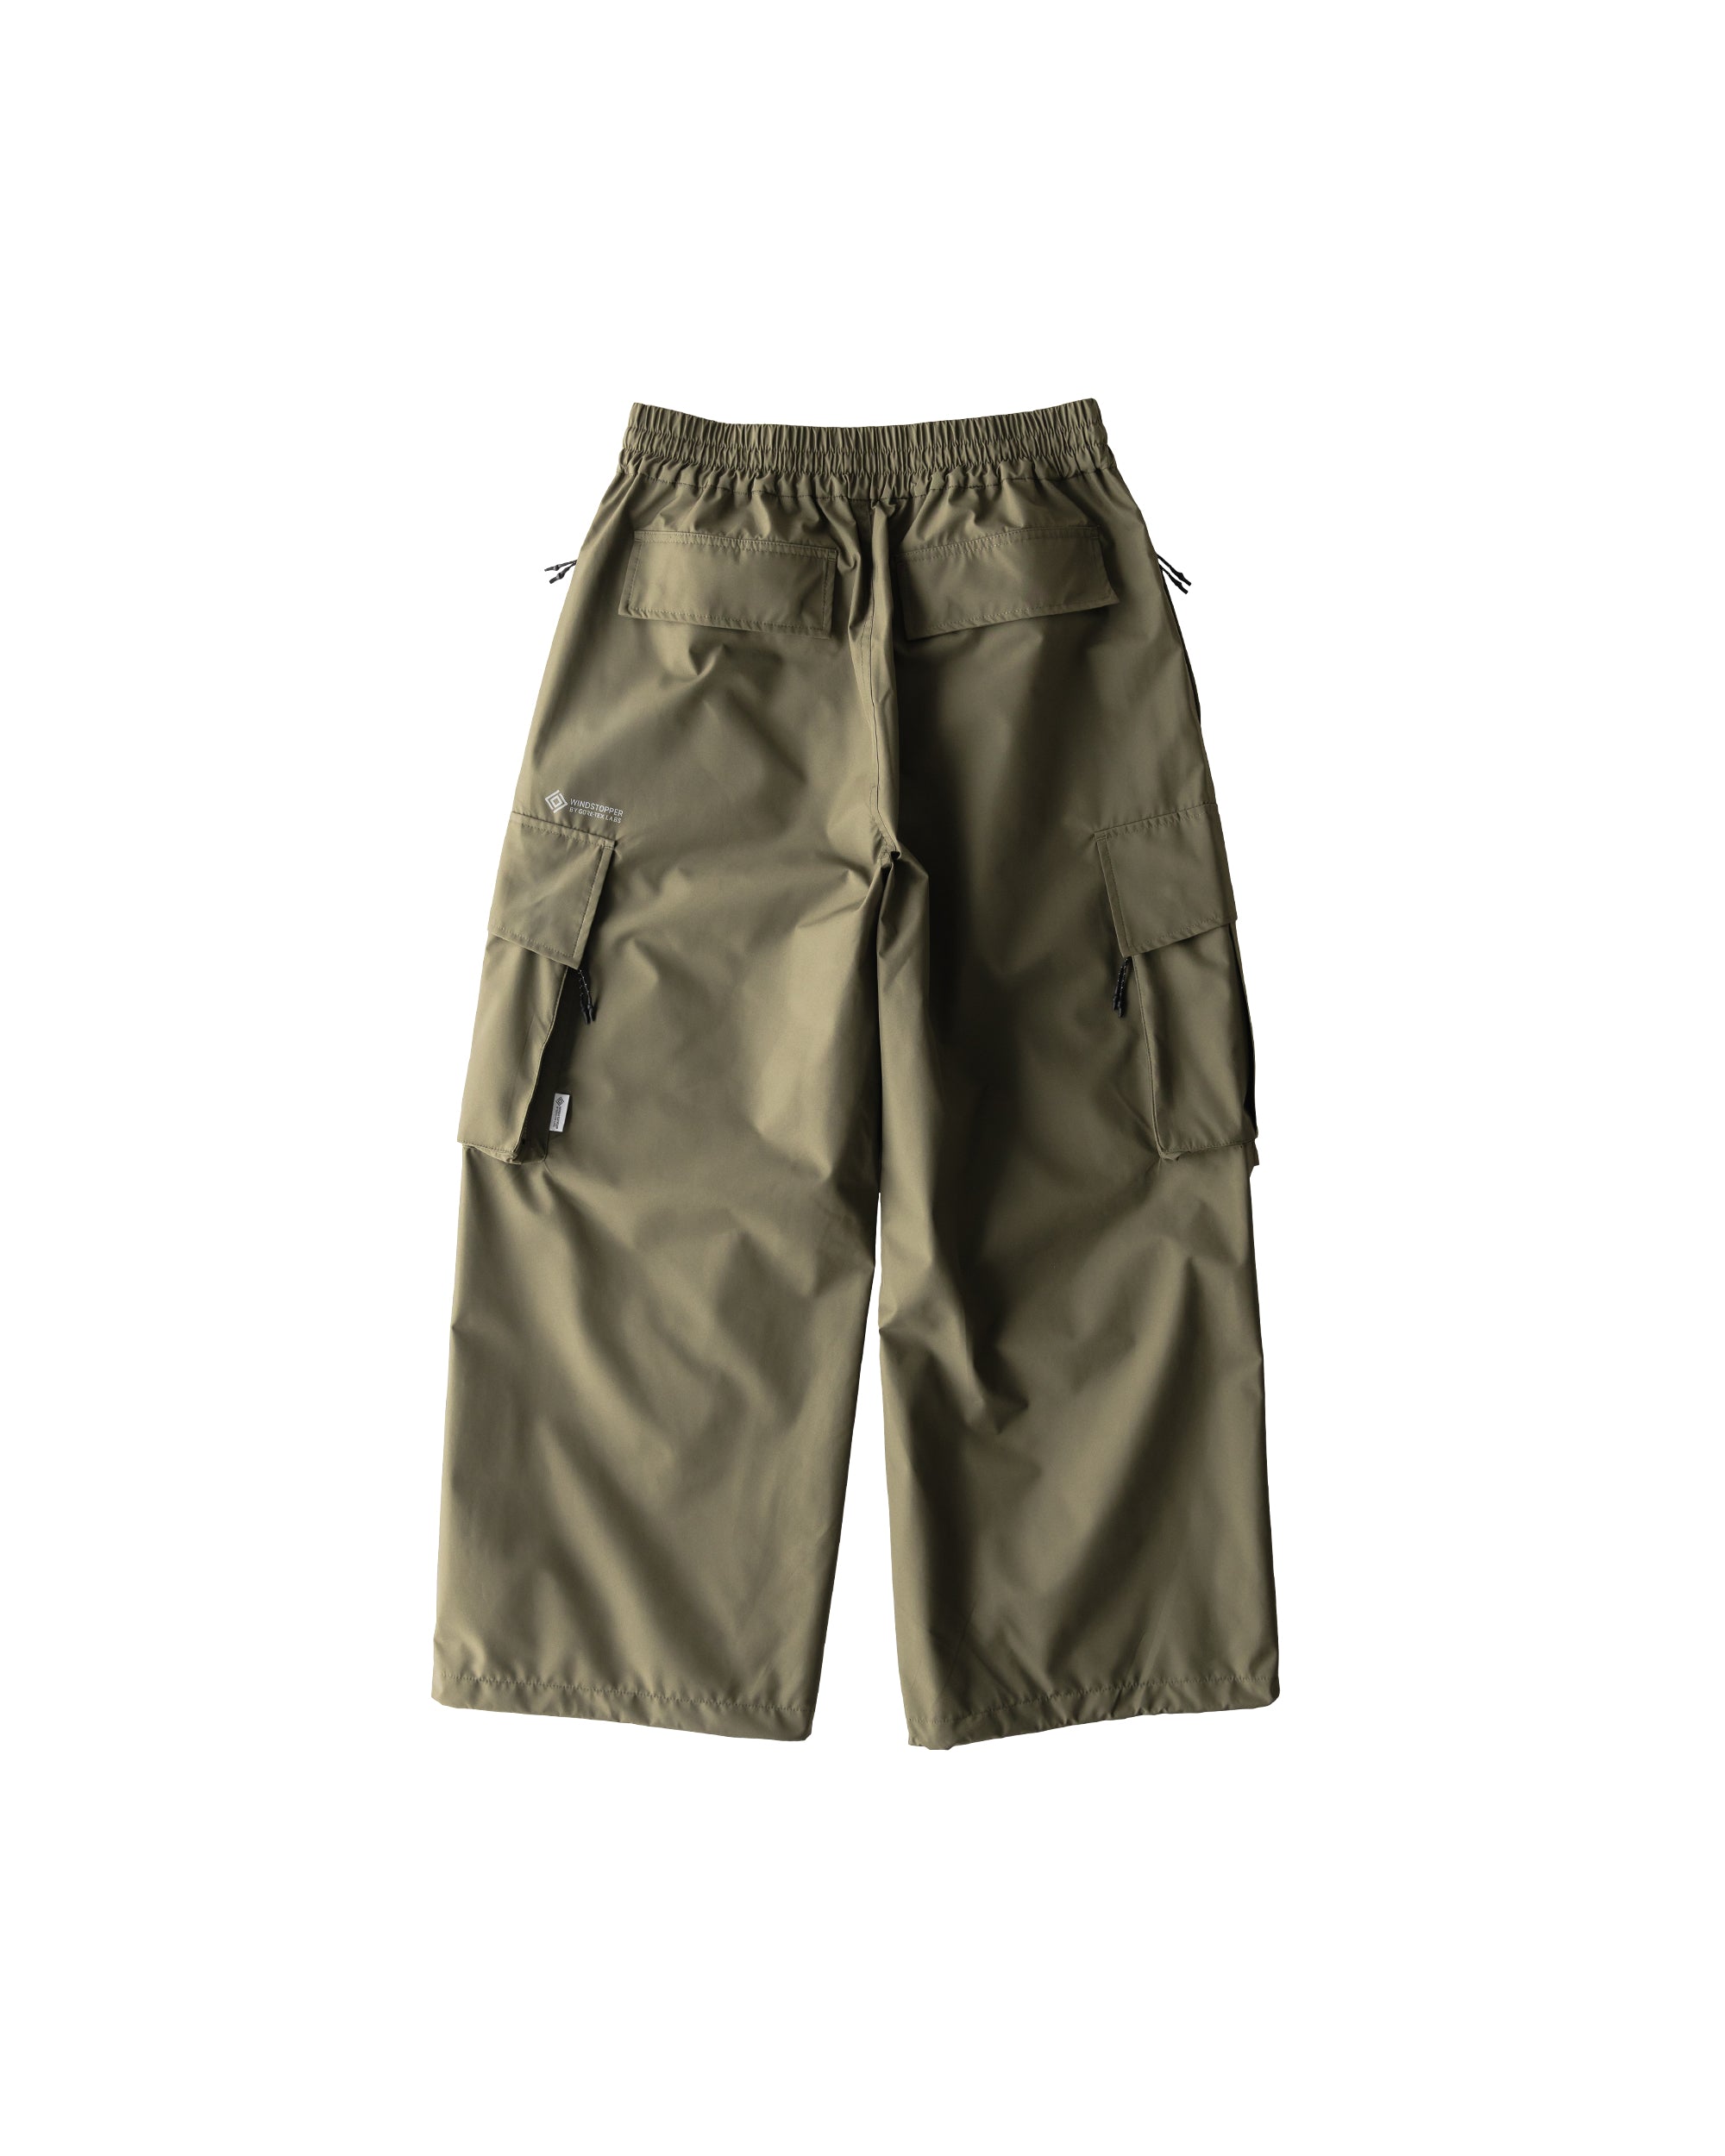 【3.6 wed 20:00- Pre-order】+phenix WINDSTOPPER® by GORE-TEX LABS CITY MILITARY PANTS